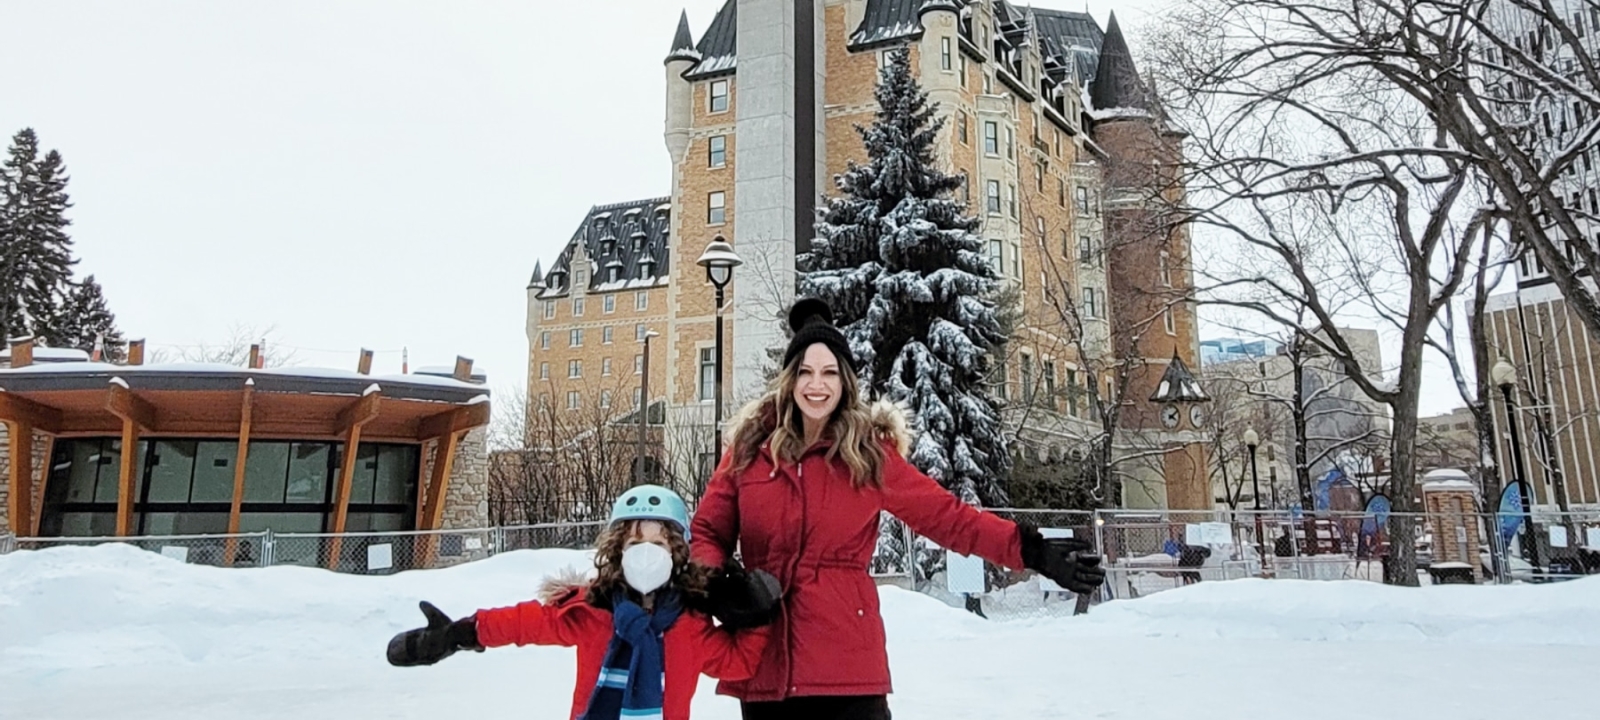 The Coolest Outdoor Winter Guide for Families in Saskatoon